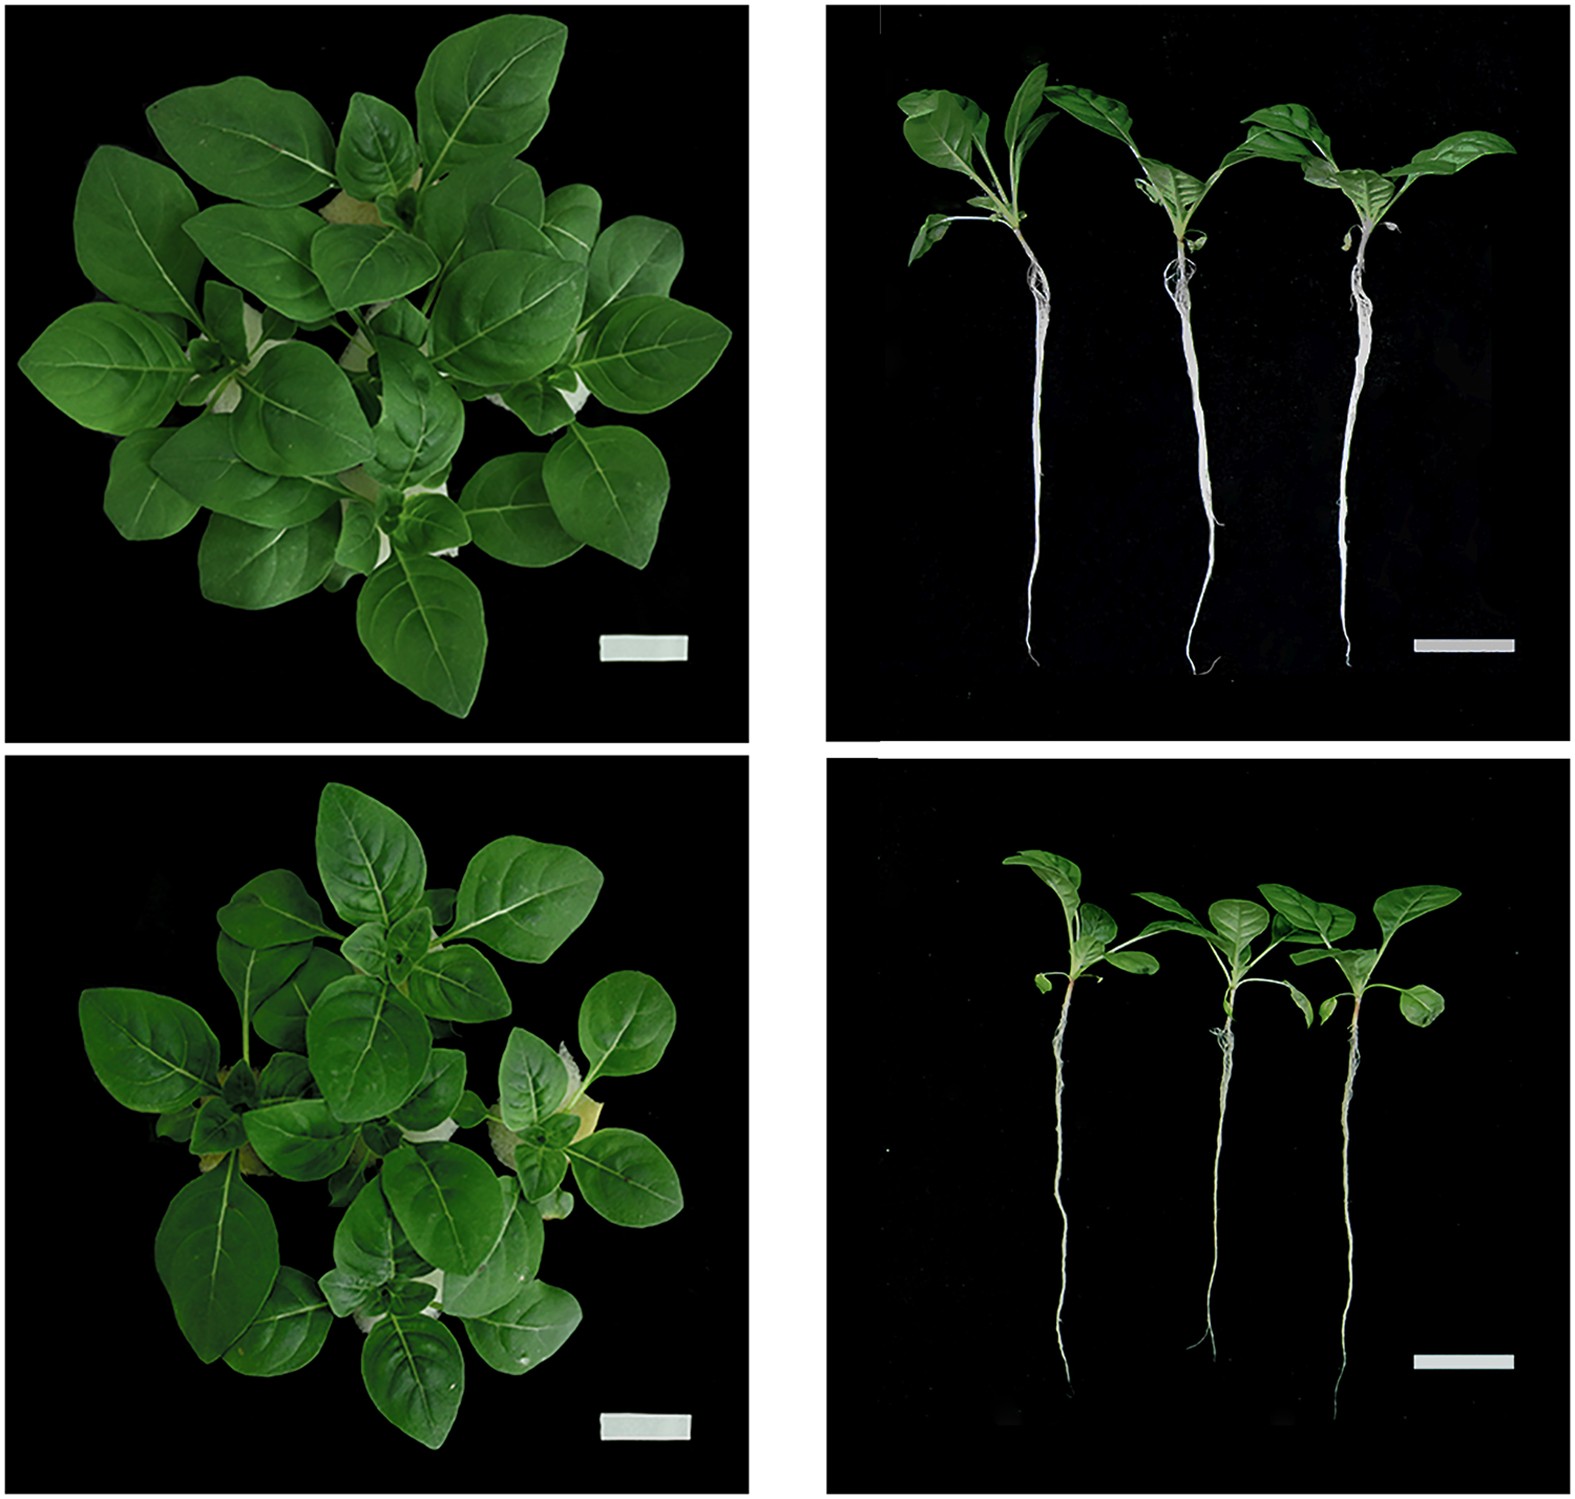 Proteomic analysis on roots of Oenothera glazioviana under copper-stress  conditions | Scientific Reports